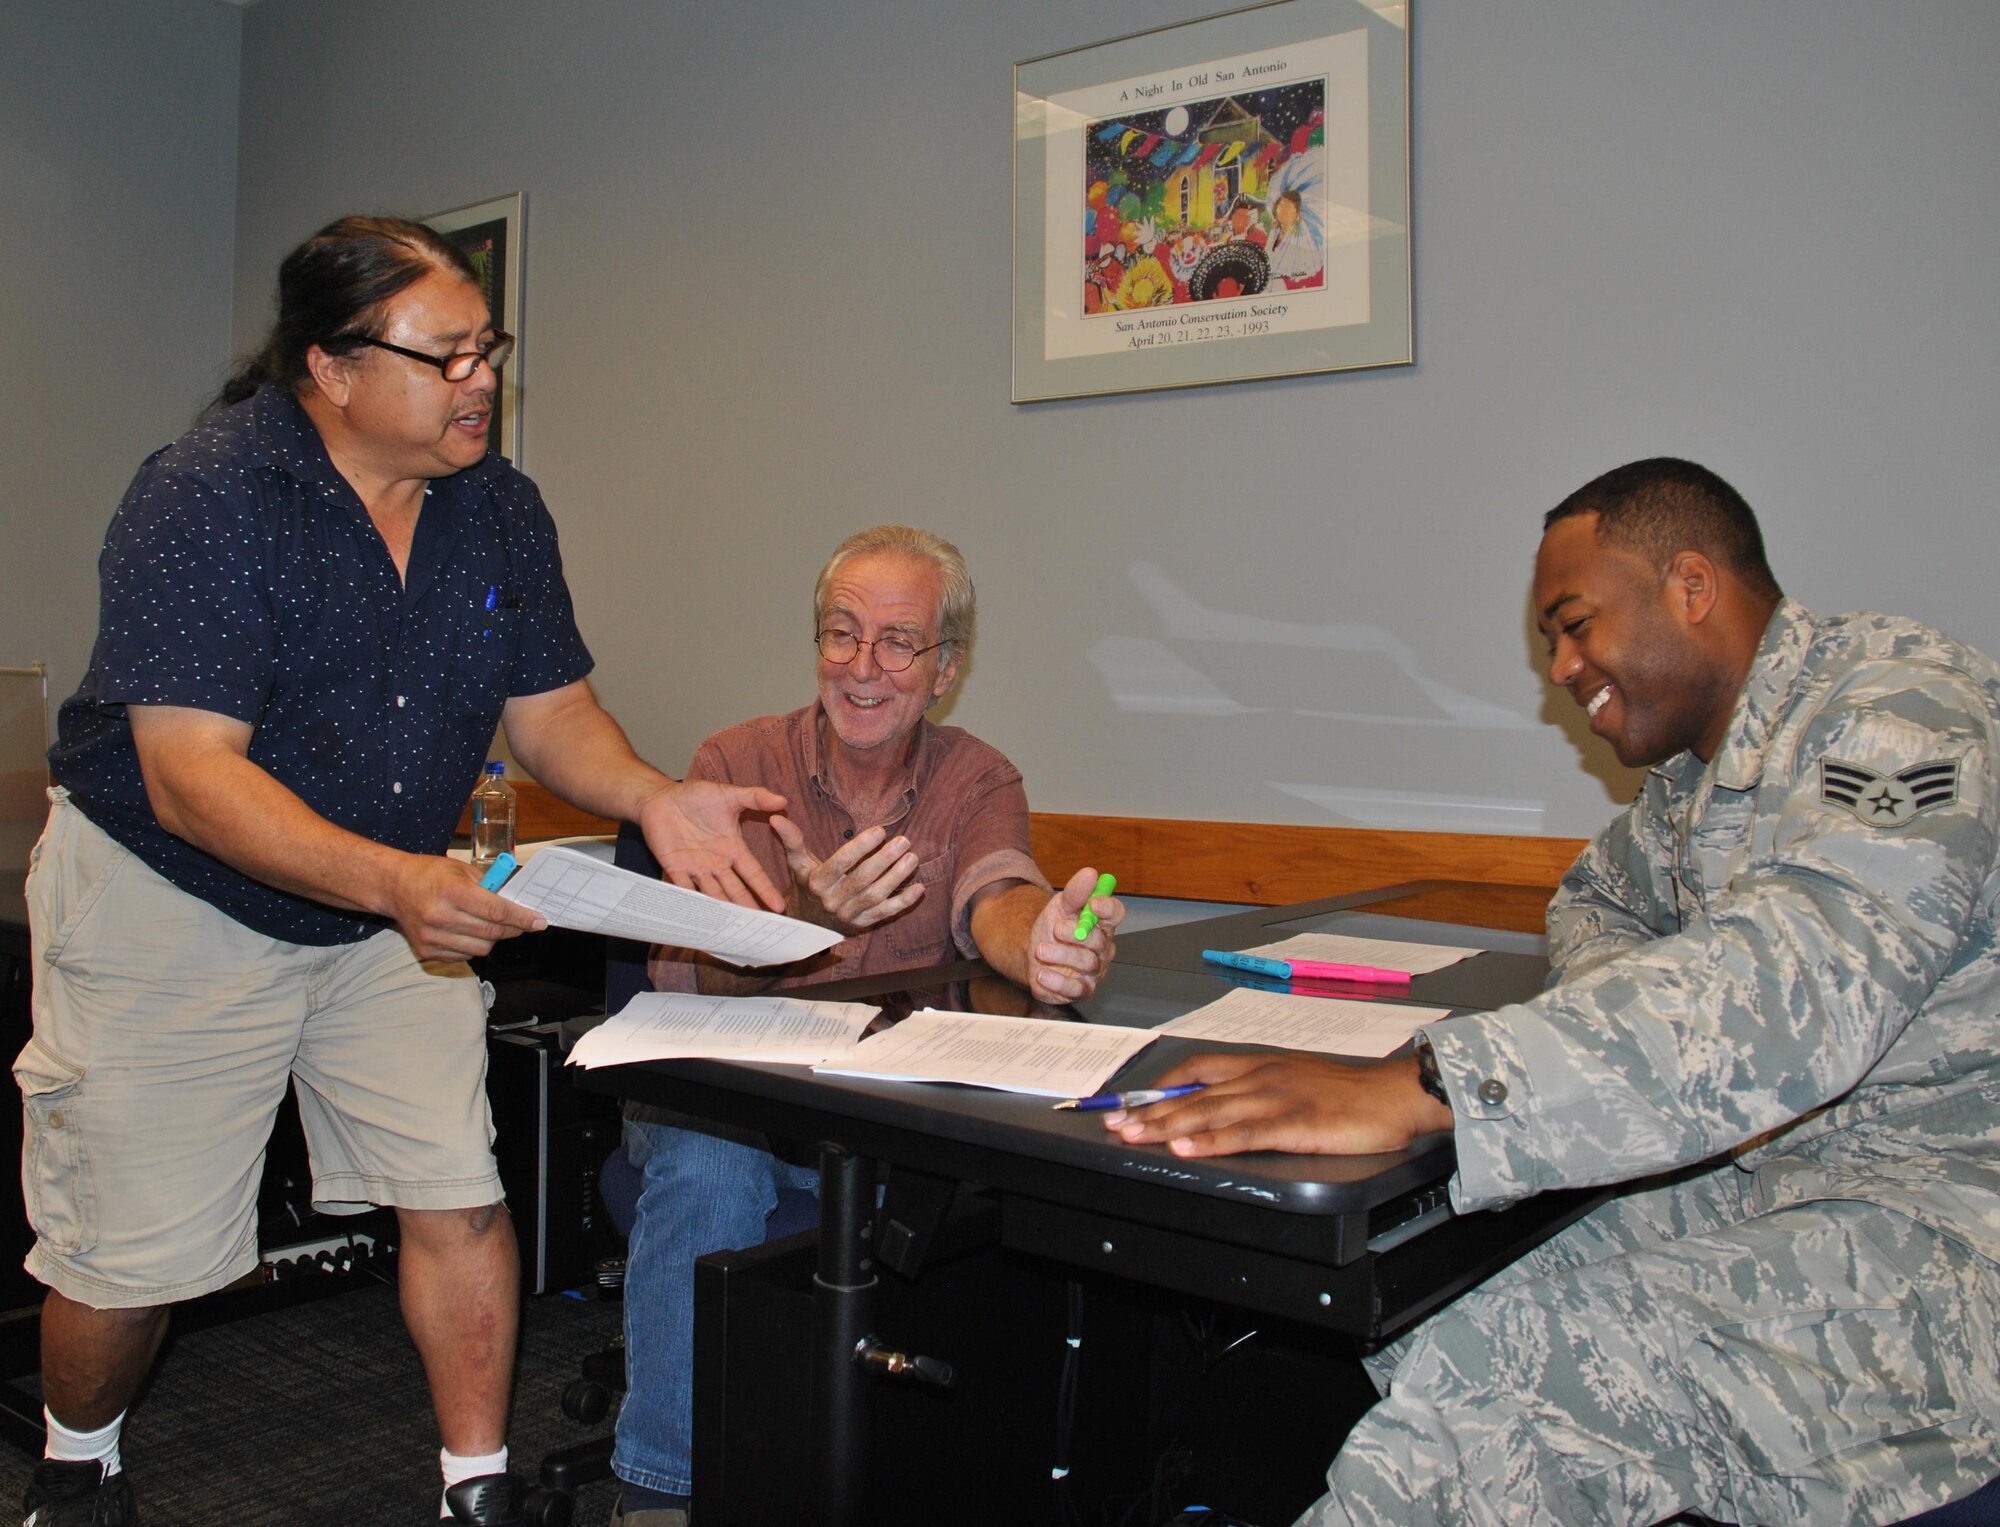 Judges for the 2016 Air Force photo contest, organized by Air Force Services Activity, discuss their score sheets. The judges are photojournalist Billy Calzada of the San Antonio Express-News, commercial photographer Gary Hartman and combat photographer Senior Airman Colville McFee with the 3rd Combat Camera Squadron, Joint Base San Antonio-Lackland. (U.S. Air Force photo/Carole Chiles Fuller)